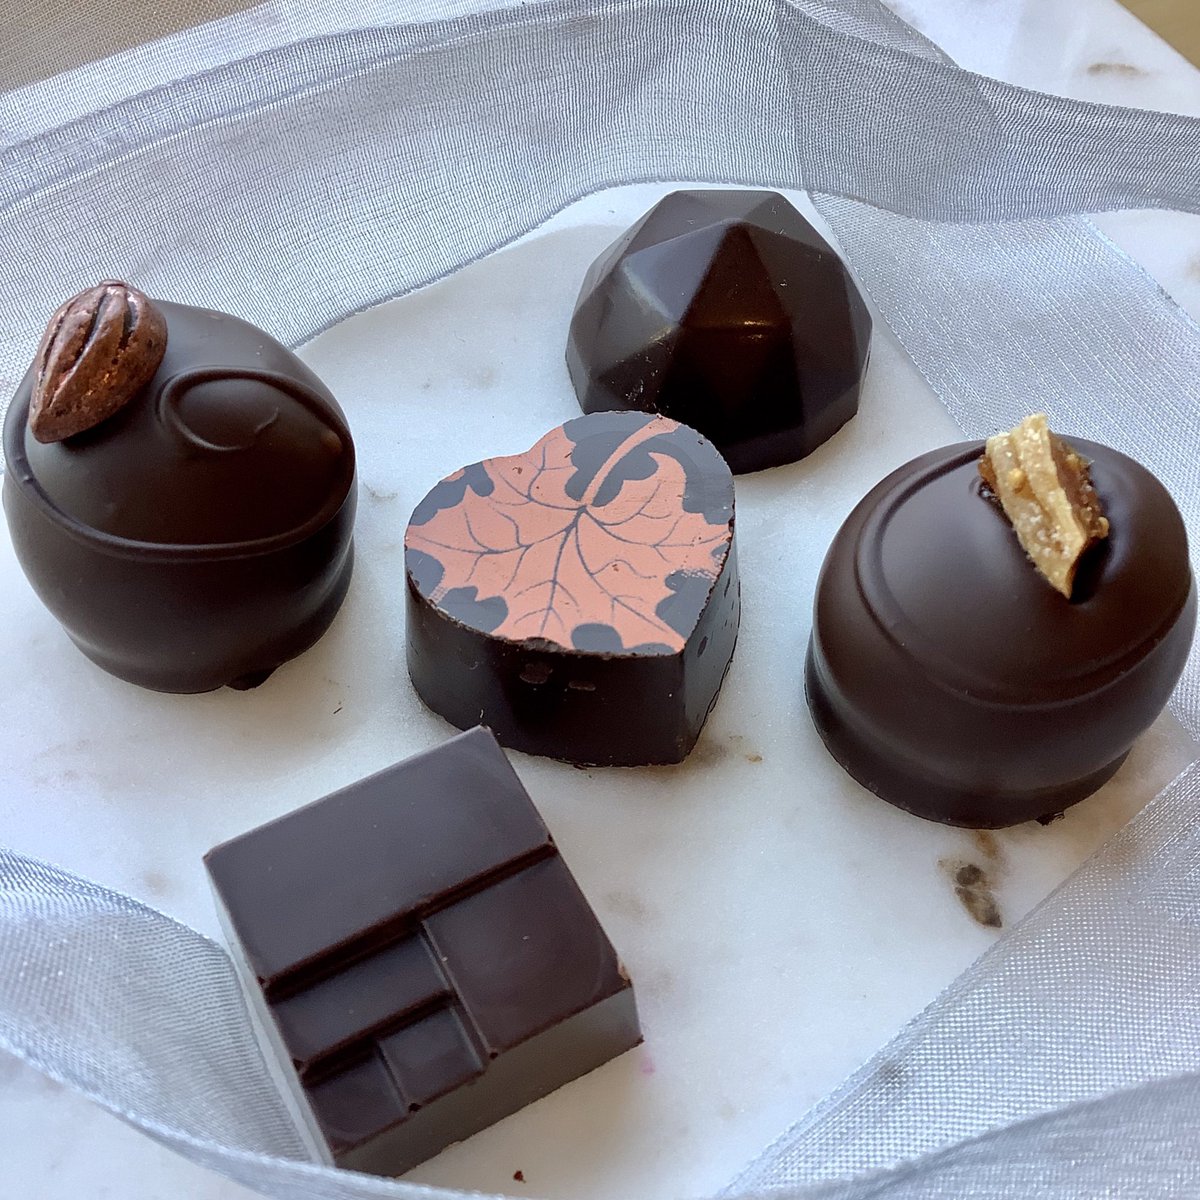 “I had to touch them all for these photos, guess I’ll have to eat them!” . . . Get yours today! 🧃Apple Cider, 🇪🇨Colombian Single Origin, 🌰Hazelnut Praline, 🍫Four Spice and 🤩Fig . . . Reminder: You can place and pick up orders on Satur-Yay! 11a-3p 😊